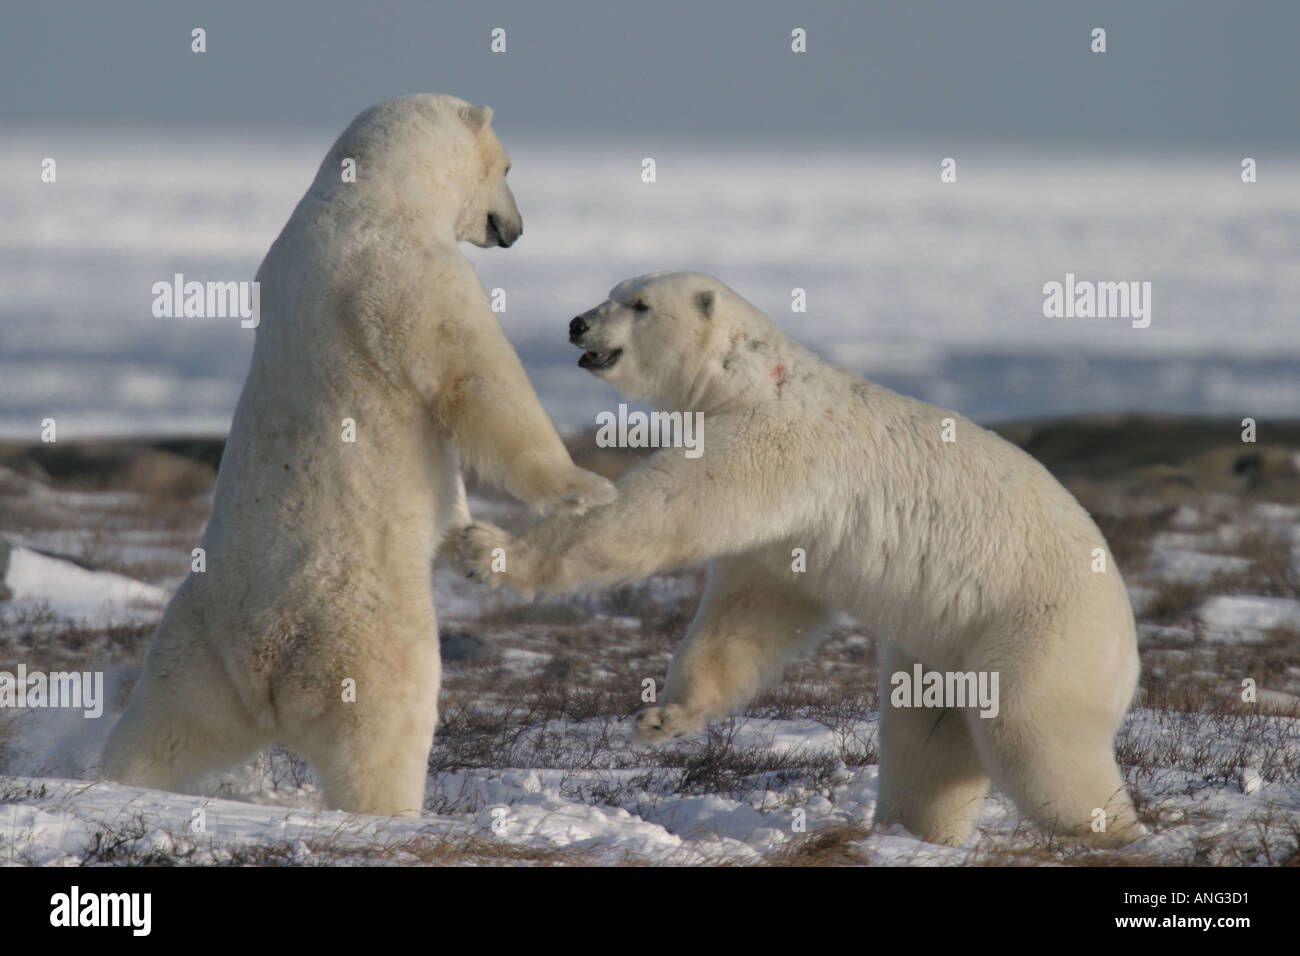 Male Polar Bears Ursus maritimus engaged in ritualistic mock fighting serious injuries are rare near Churchill northern Ma Stock Photo